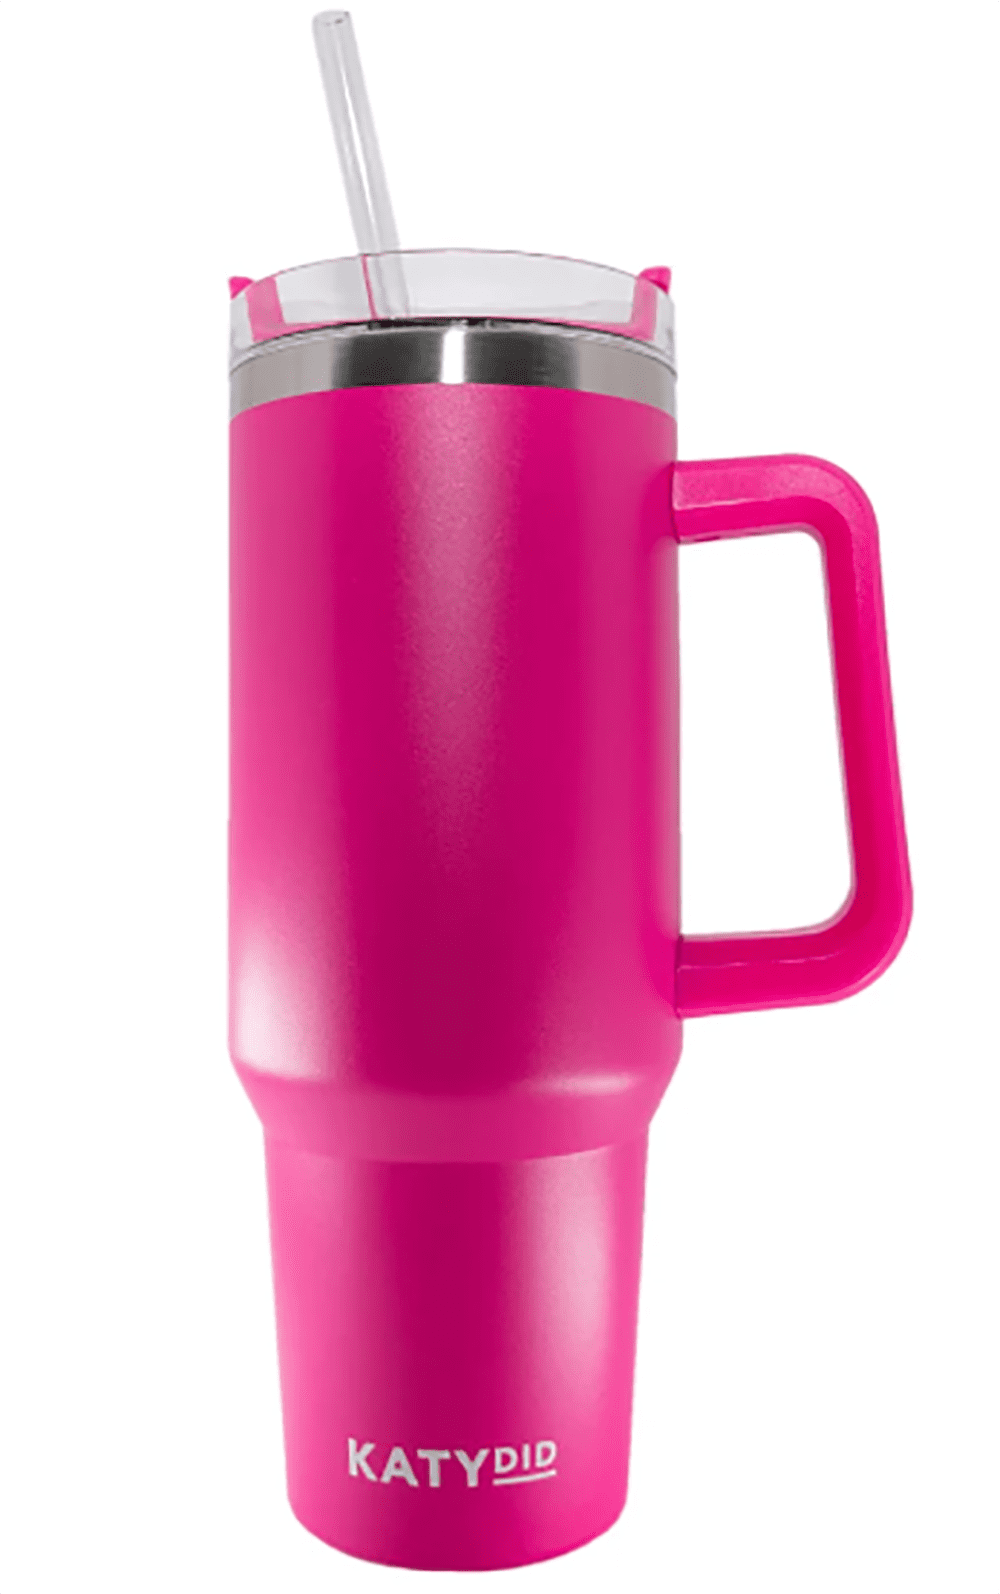 40oz Insulated Pink Mug Insulated Tumblers With Lids With Handle, Lid,  Straw, And Stainless Steel Construction Perfect For Coffee, Tea, Water,  Vacuum Insulation, Blue Orchid Designs Ready To Ship From Bestdeals, $7.9